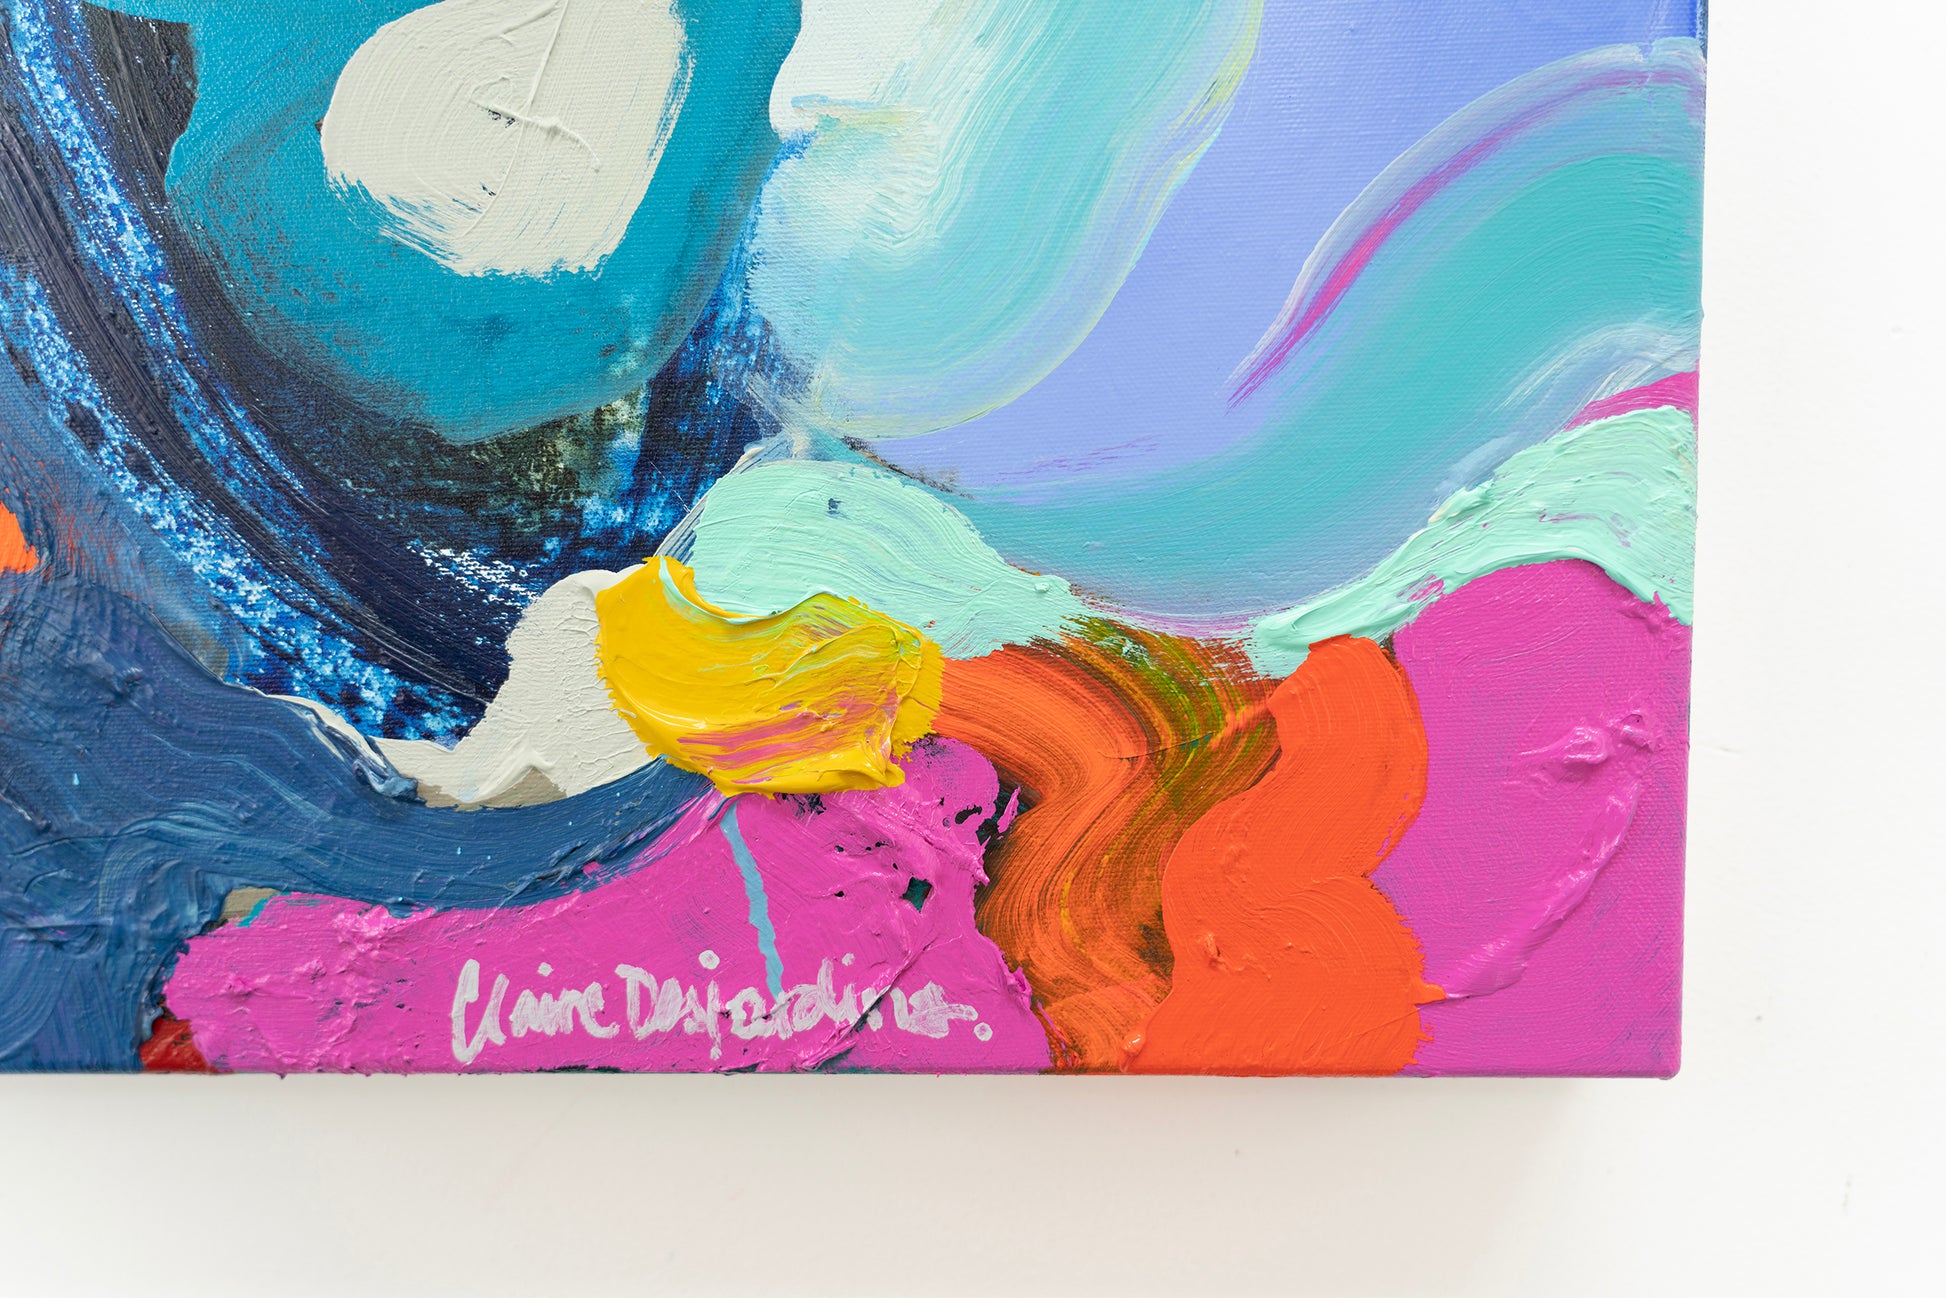 Detail image of signature of the abstract painting No Such Thing As Luck by Canadian artist, Claire Desjardins.